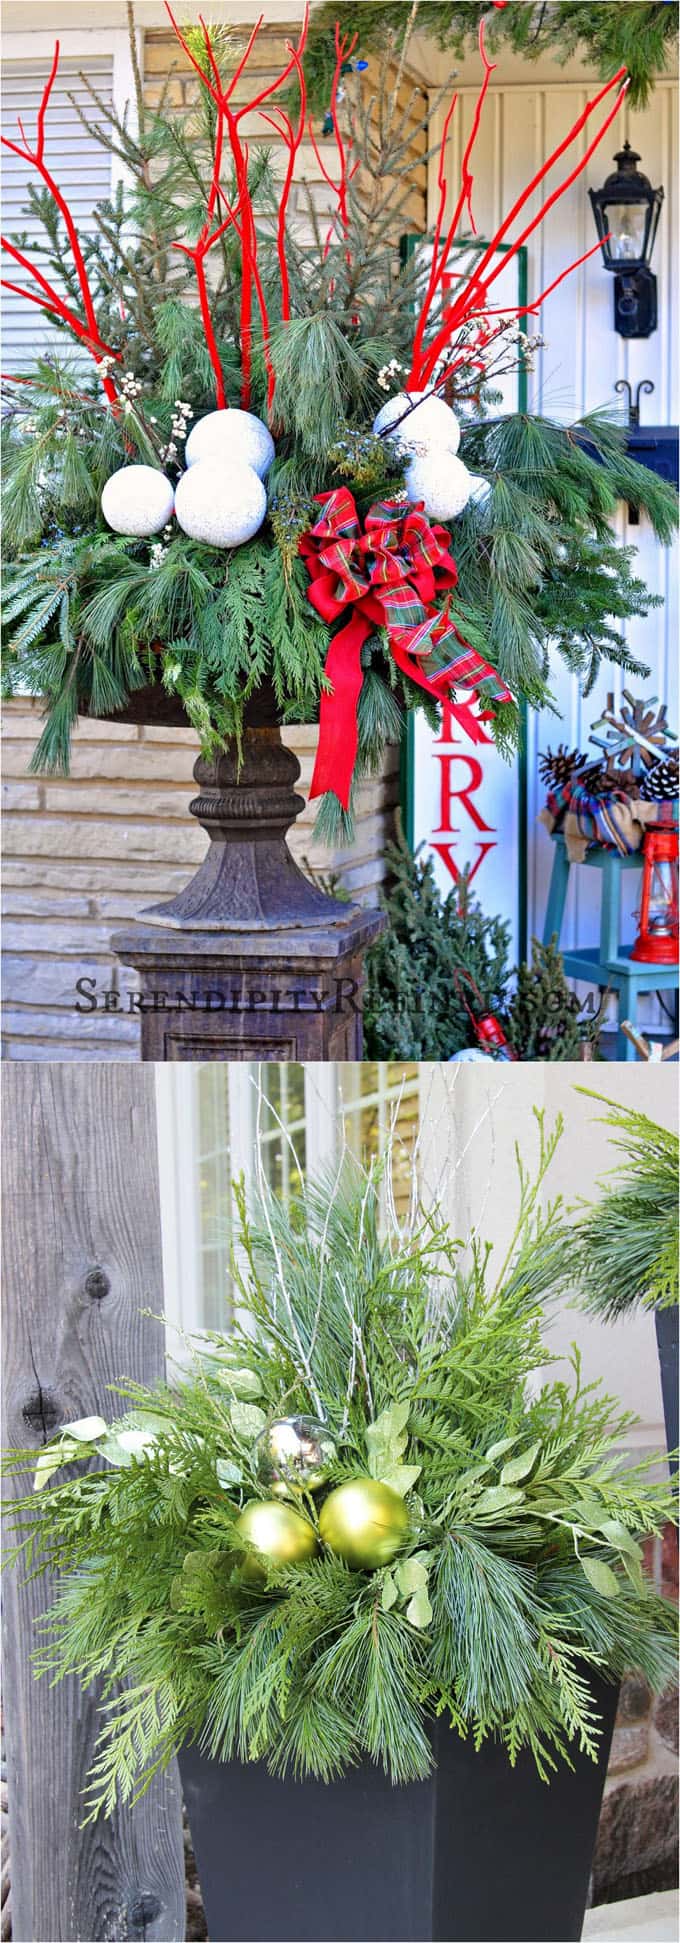 24 Stunning Christmas pots and planters to DIY for almost free! How to create colorful winter planters as beautiful Christmas outdoor decorations, with evergreens, berries, pinecones, branches, & creative elements! - A Piece of Rainbow #containergardening #planters #pots #plants #christmas #christmasdecorations #christmasideas #thanksgiving #holiday #gardens #patio #patiodesign #backyard #curbappeal #diy #gardening #gardeningtips #gardendesign #gardenideas #homedecor #homedecorideas